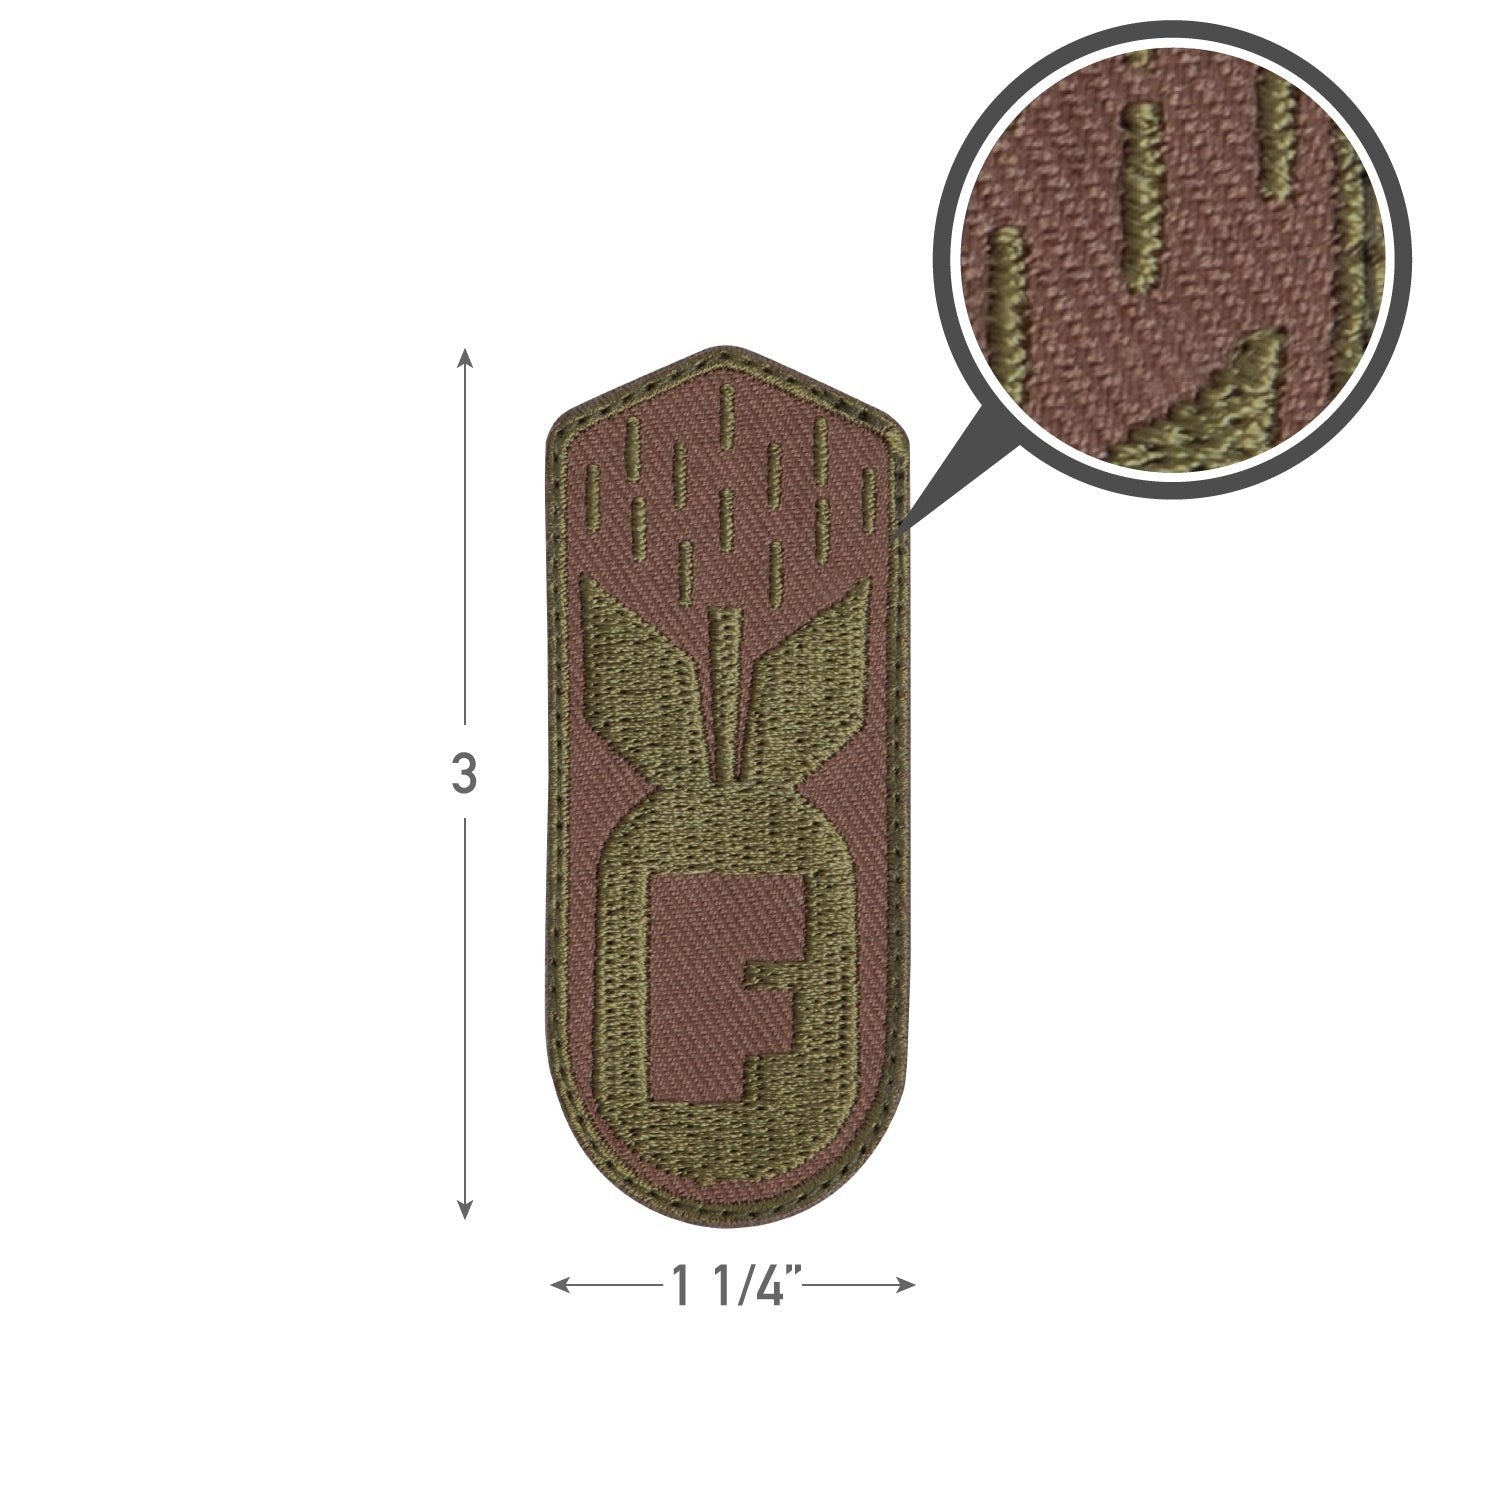 F-Bomb Patch With Hook Back - Coyote Brown - Tactical Choice Plus